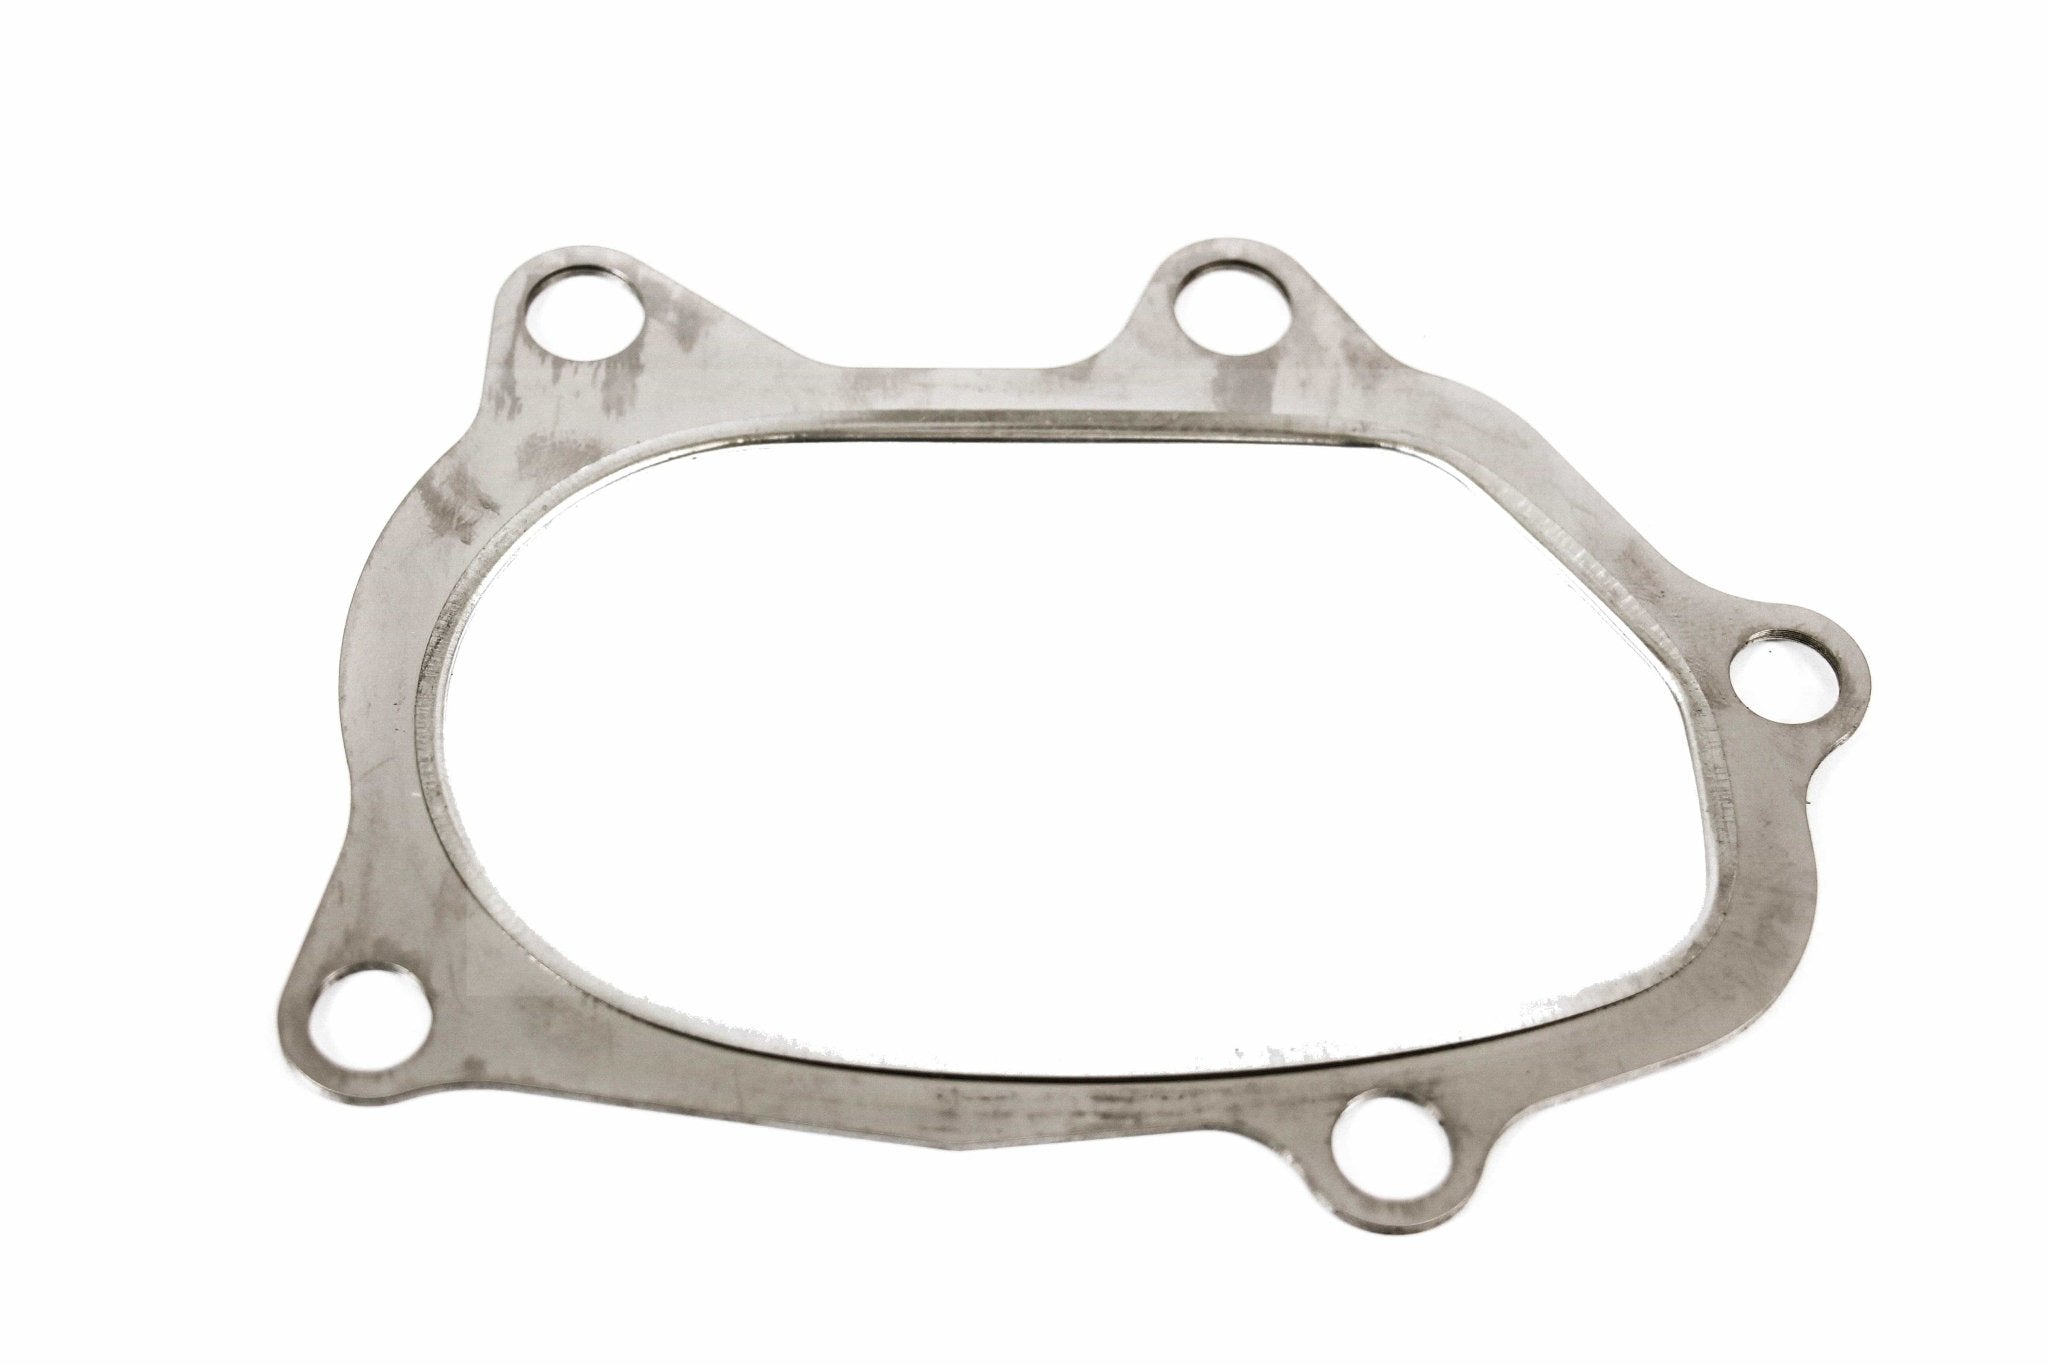 PLM Subaru Turbo to Downpipe Gasket - 7 Layers - Dirty Racing Products